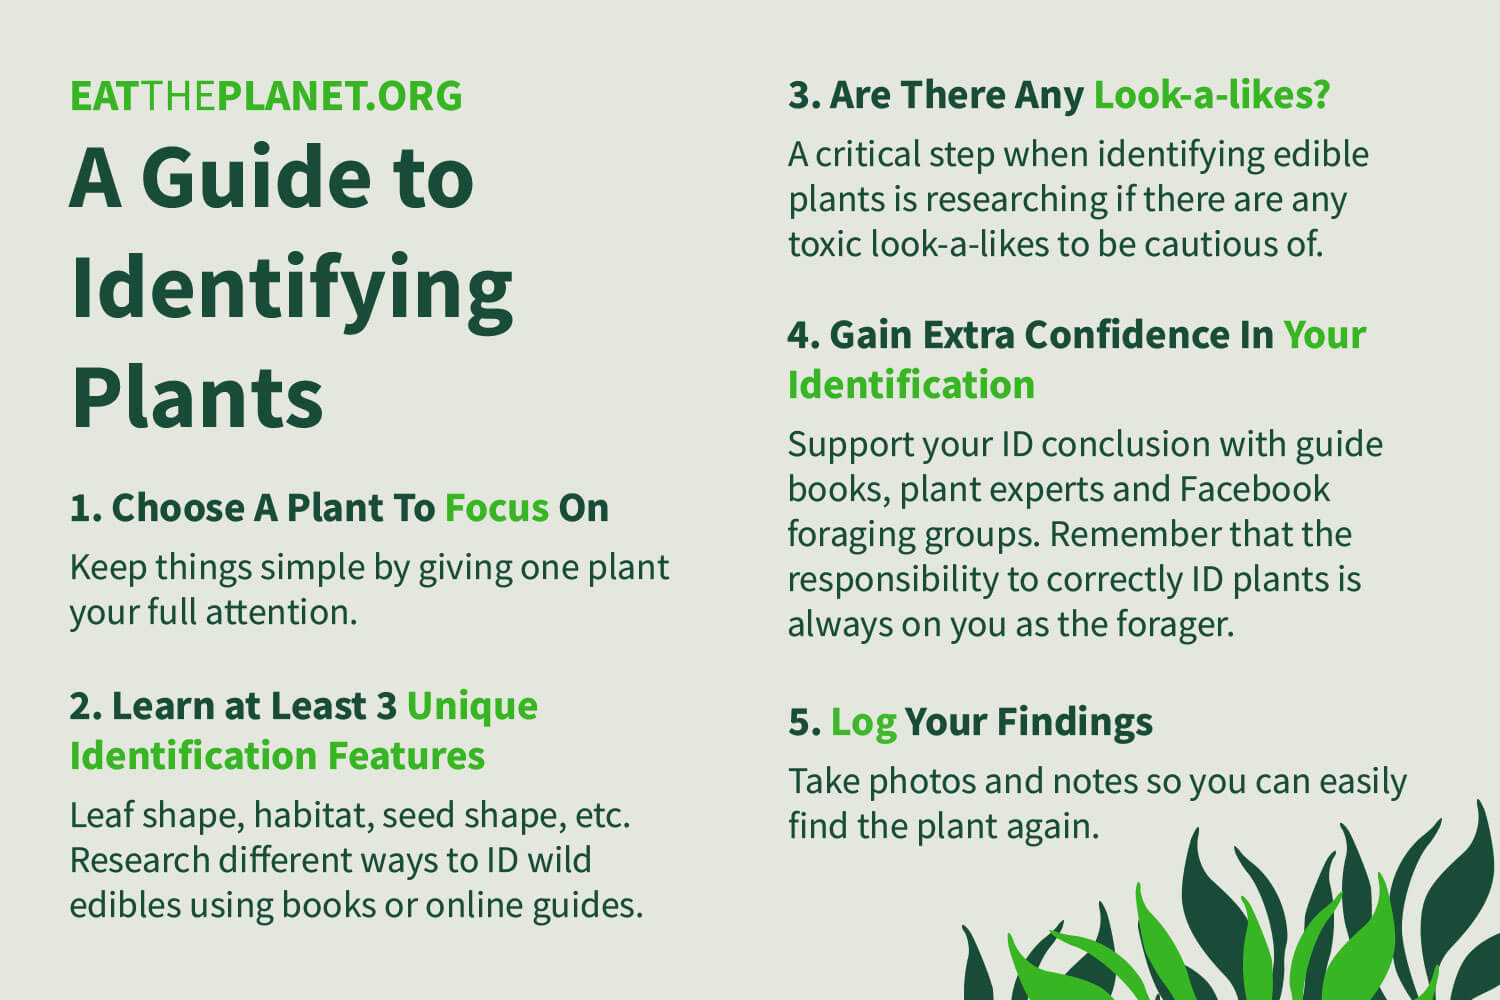 Graphic showing summary of each plant identification step, image links to the full list.